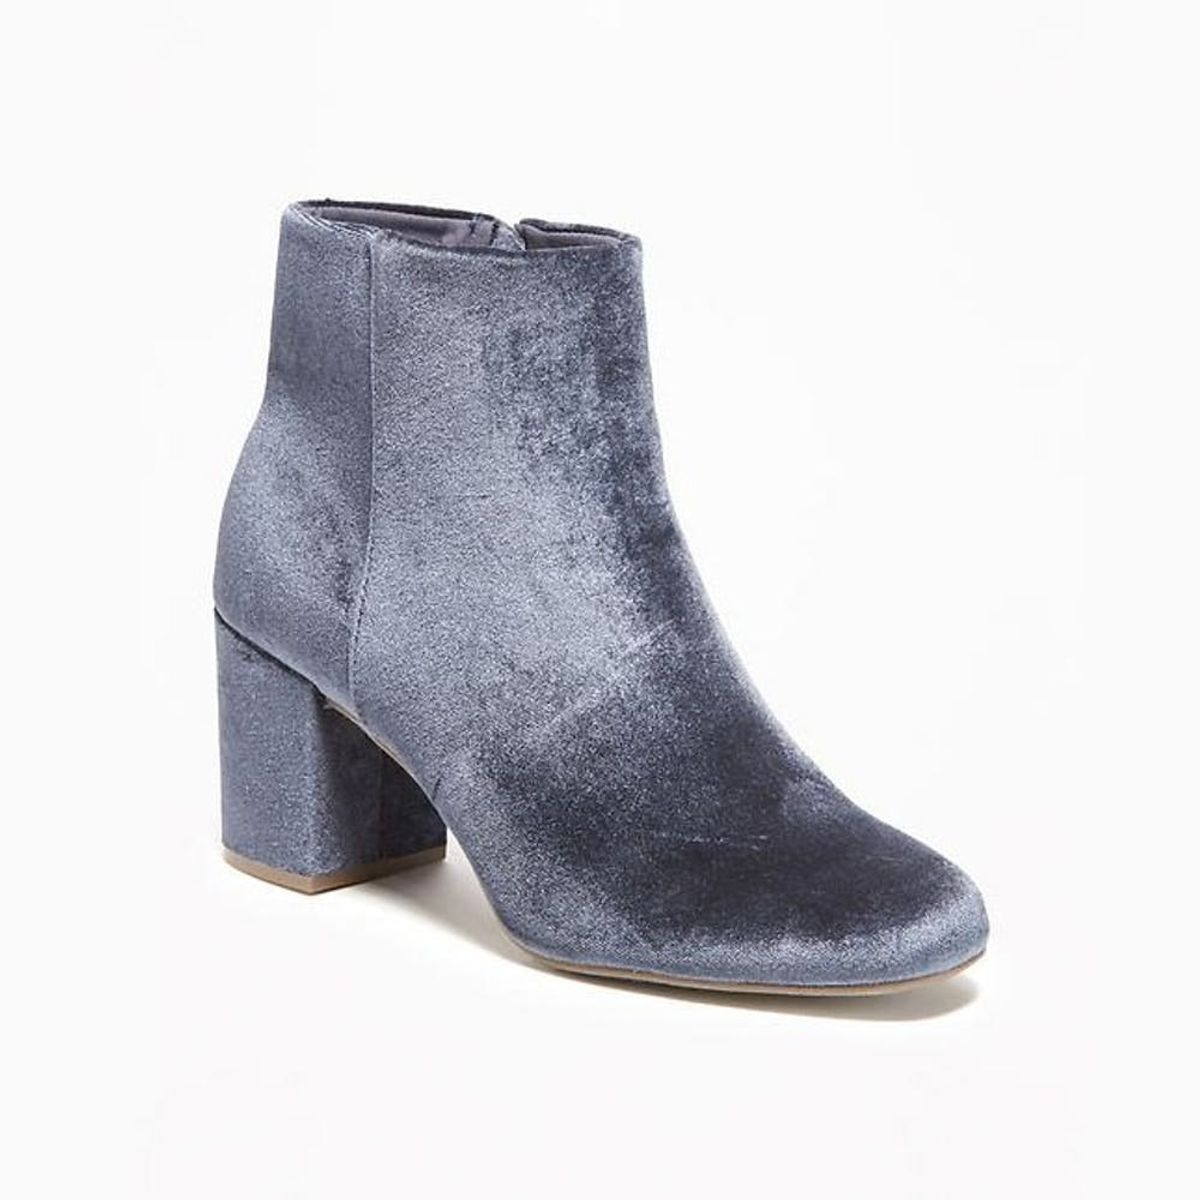 These $45 Old Navy Velvet Ankle Boots Are This Season’s Biggest Steal ...